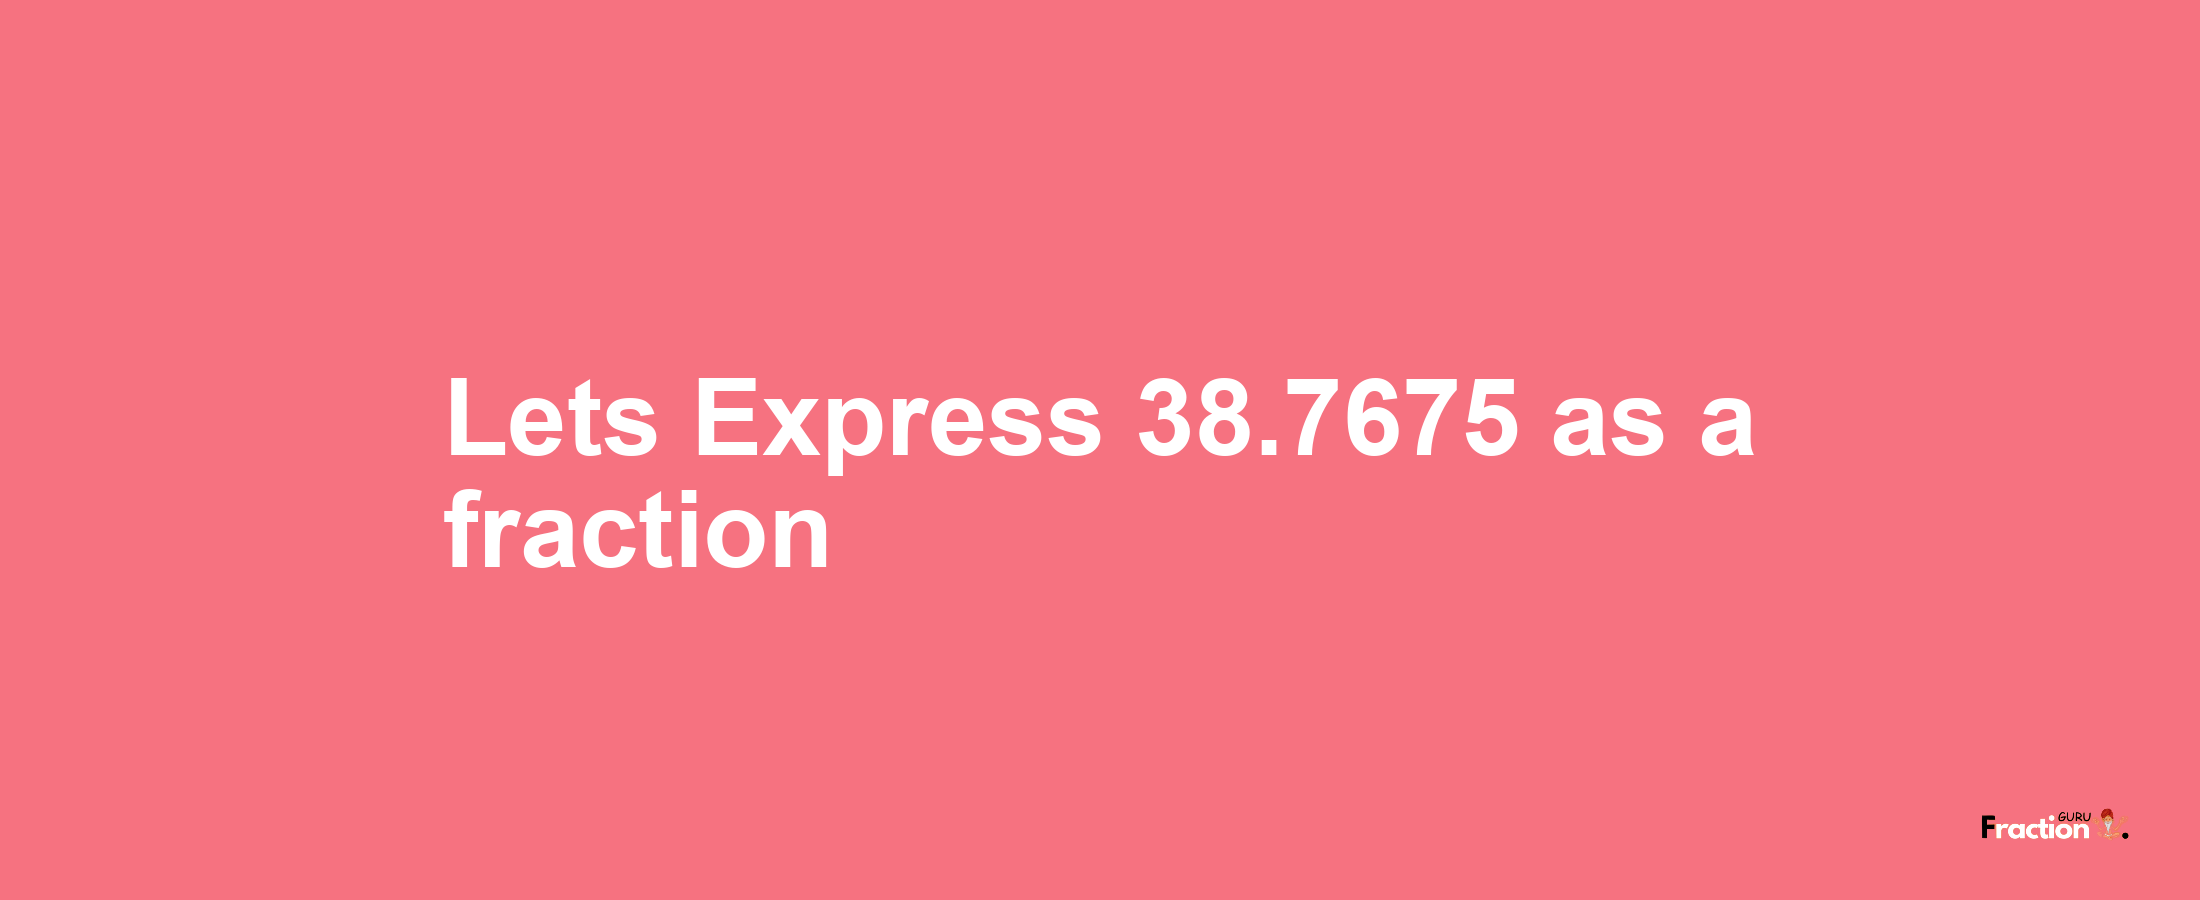 Lets Express 38.7675 as afraction